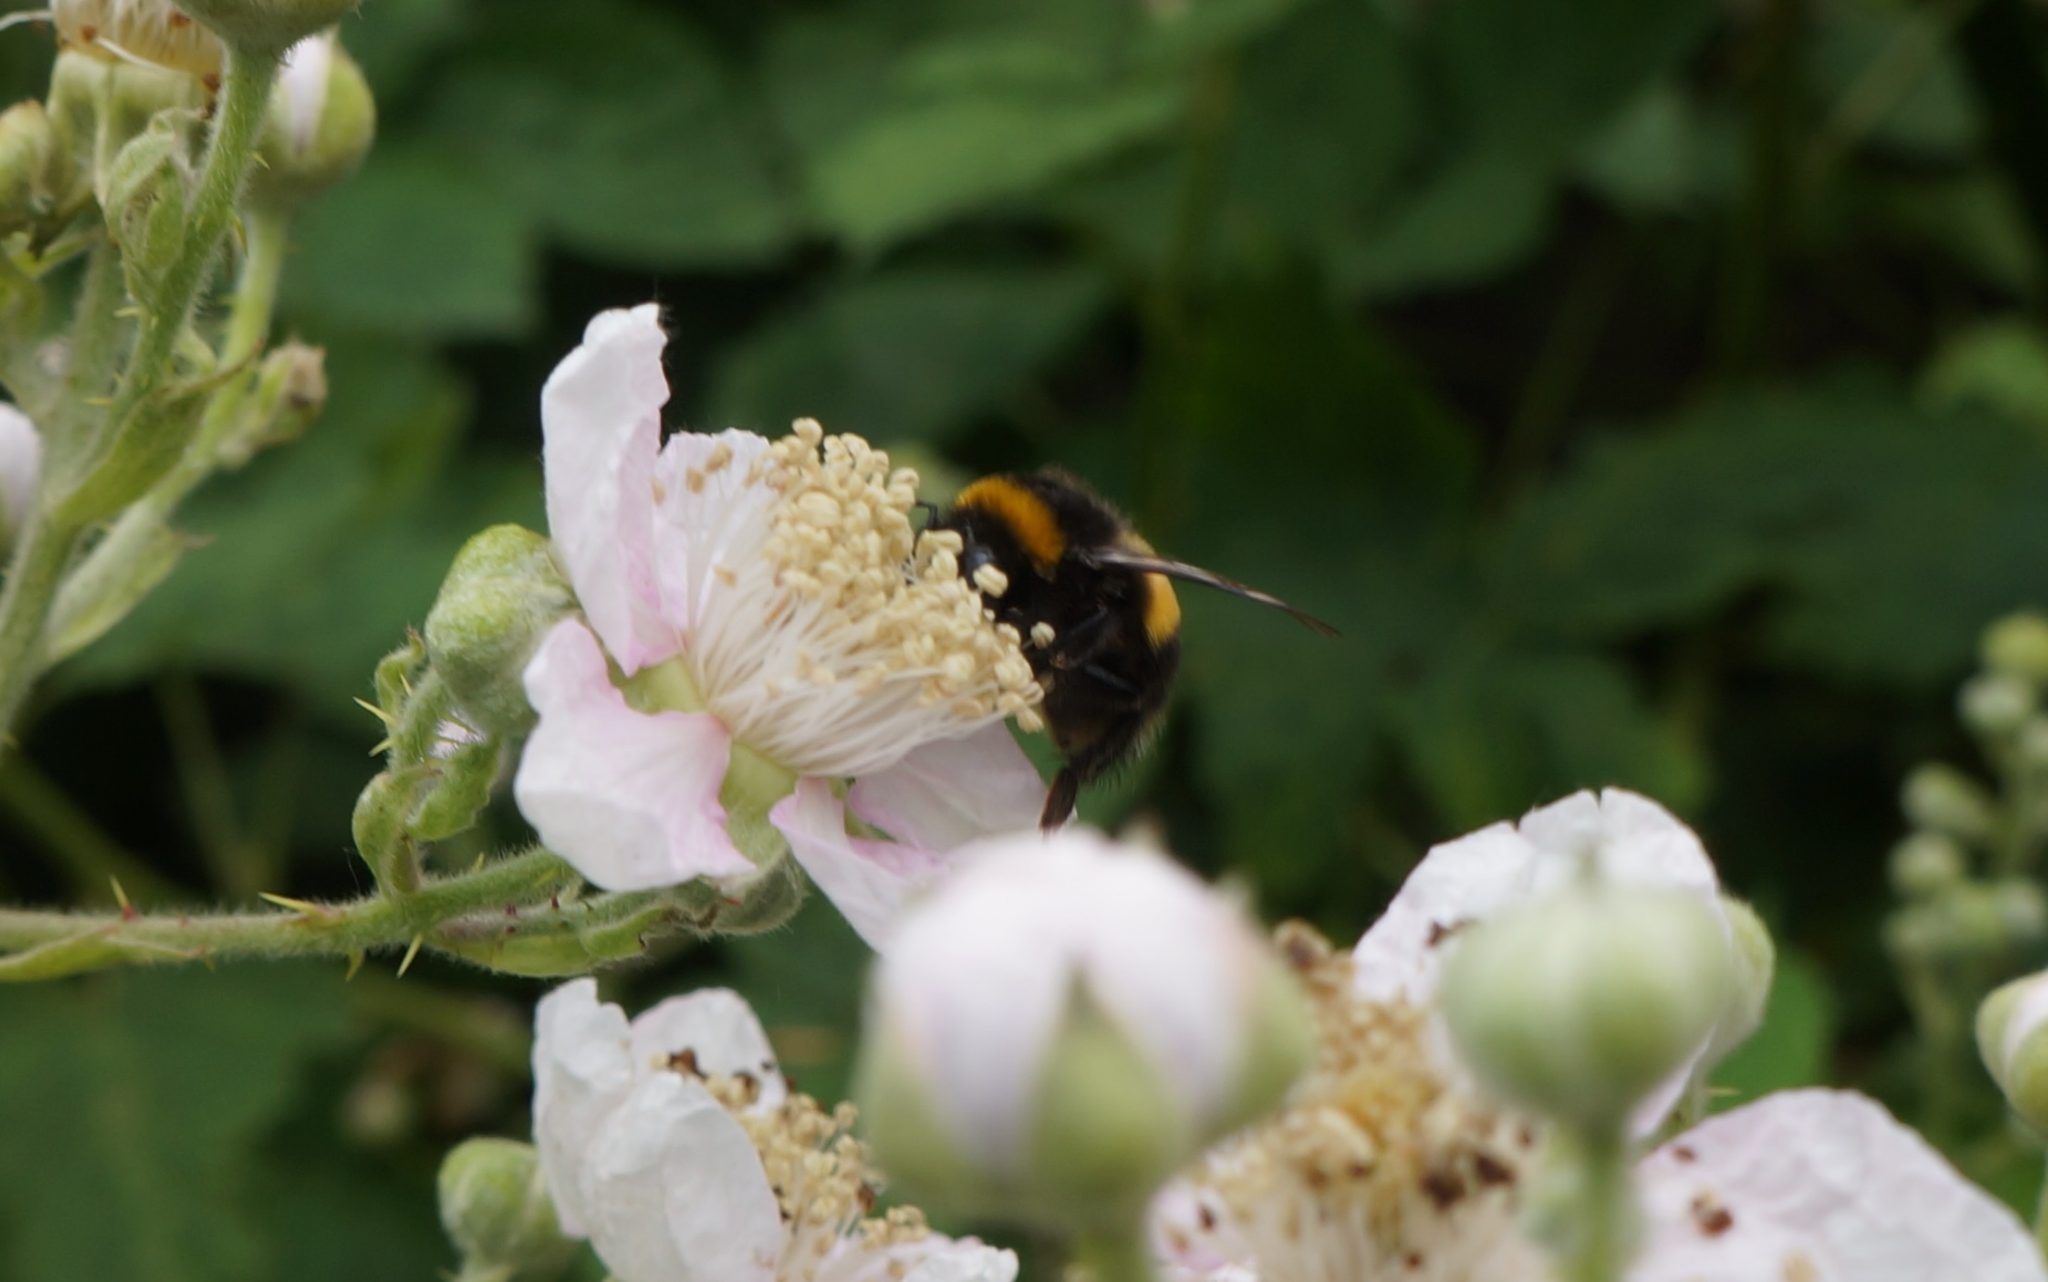 June 17 Bumble bees as well. Honey bees are not the only pollinators